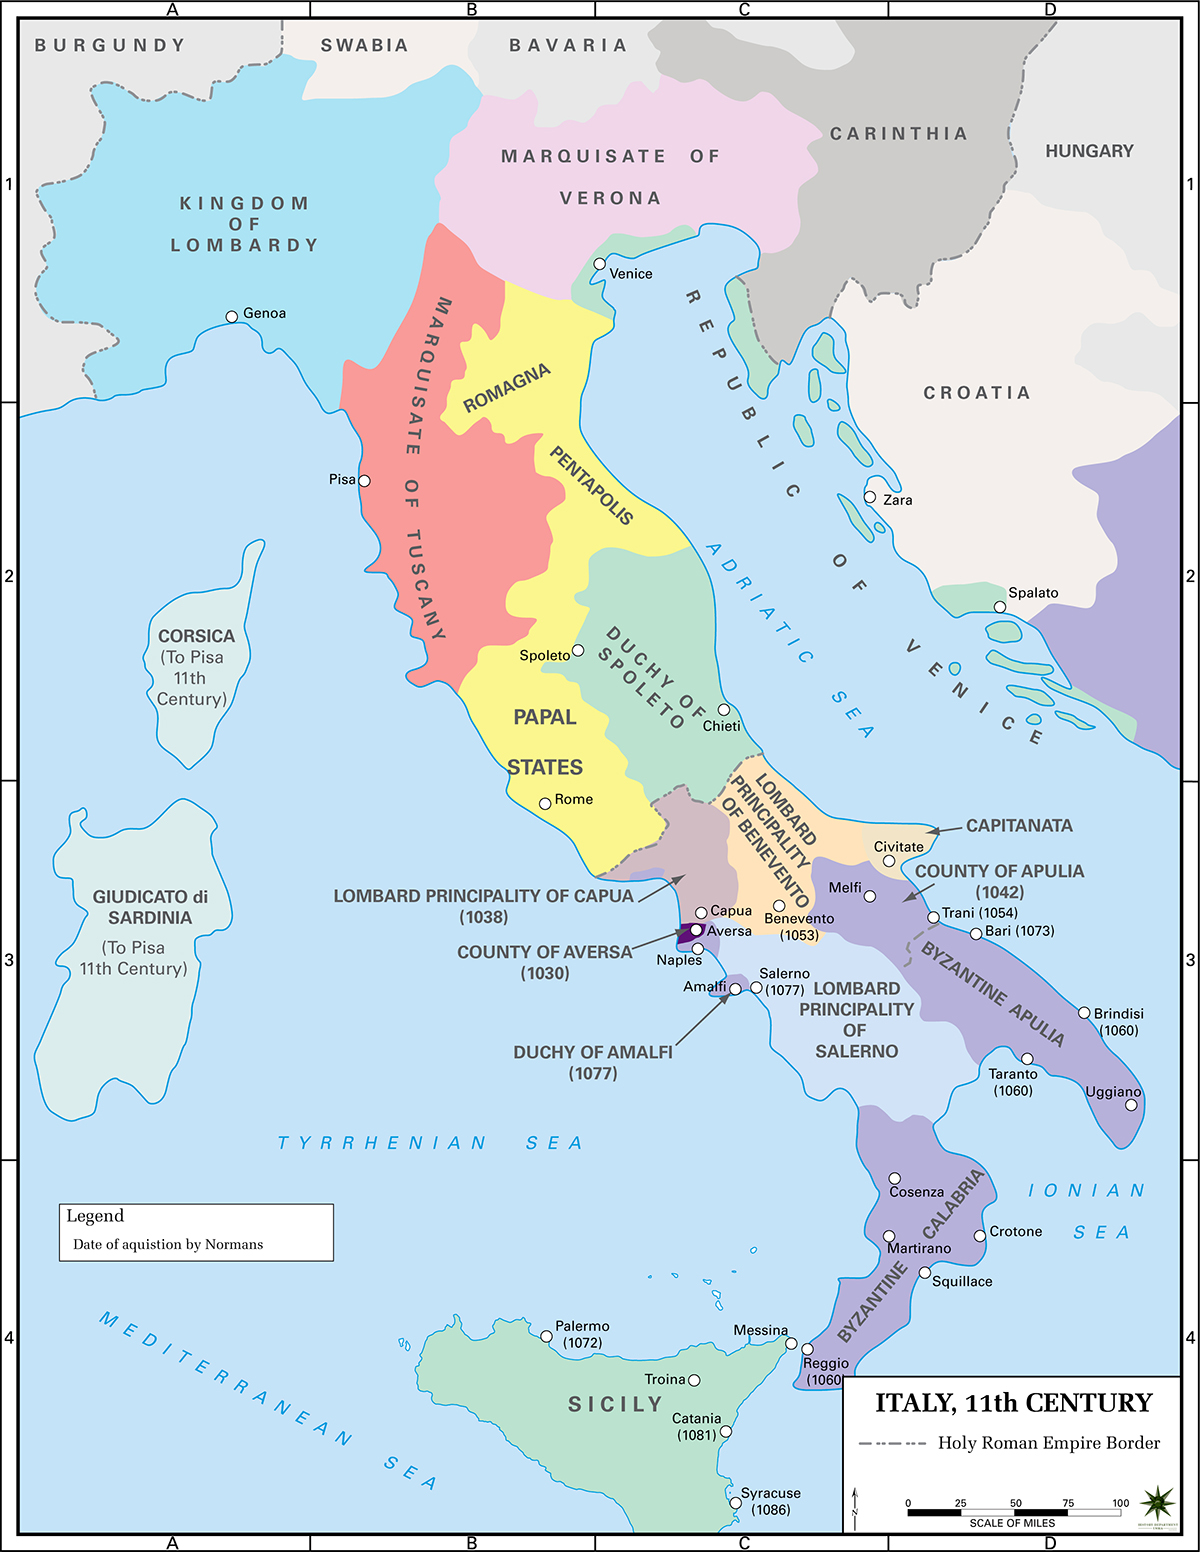 Political Map of Italy in the 11th Century